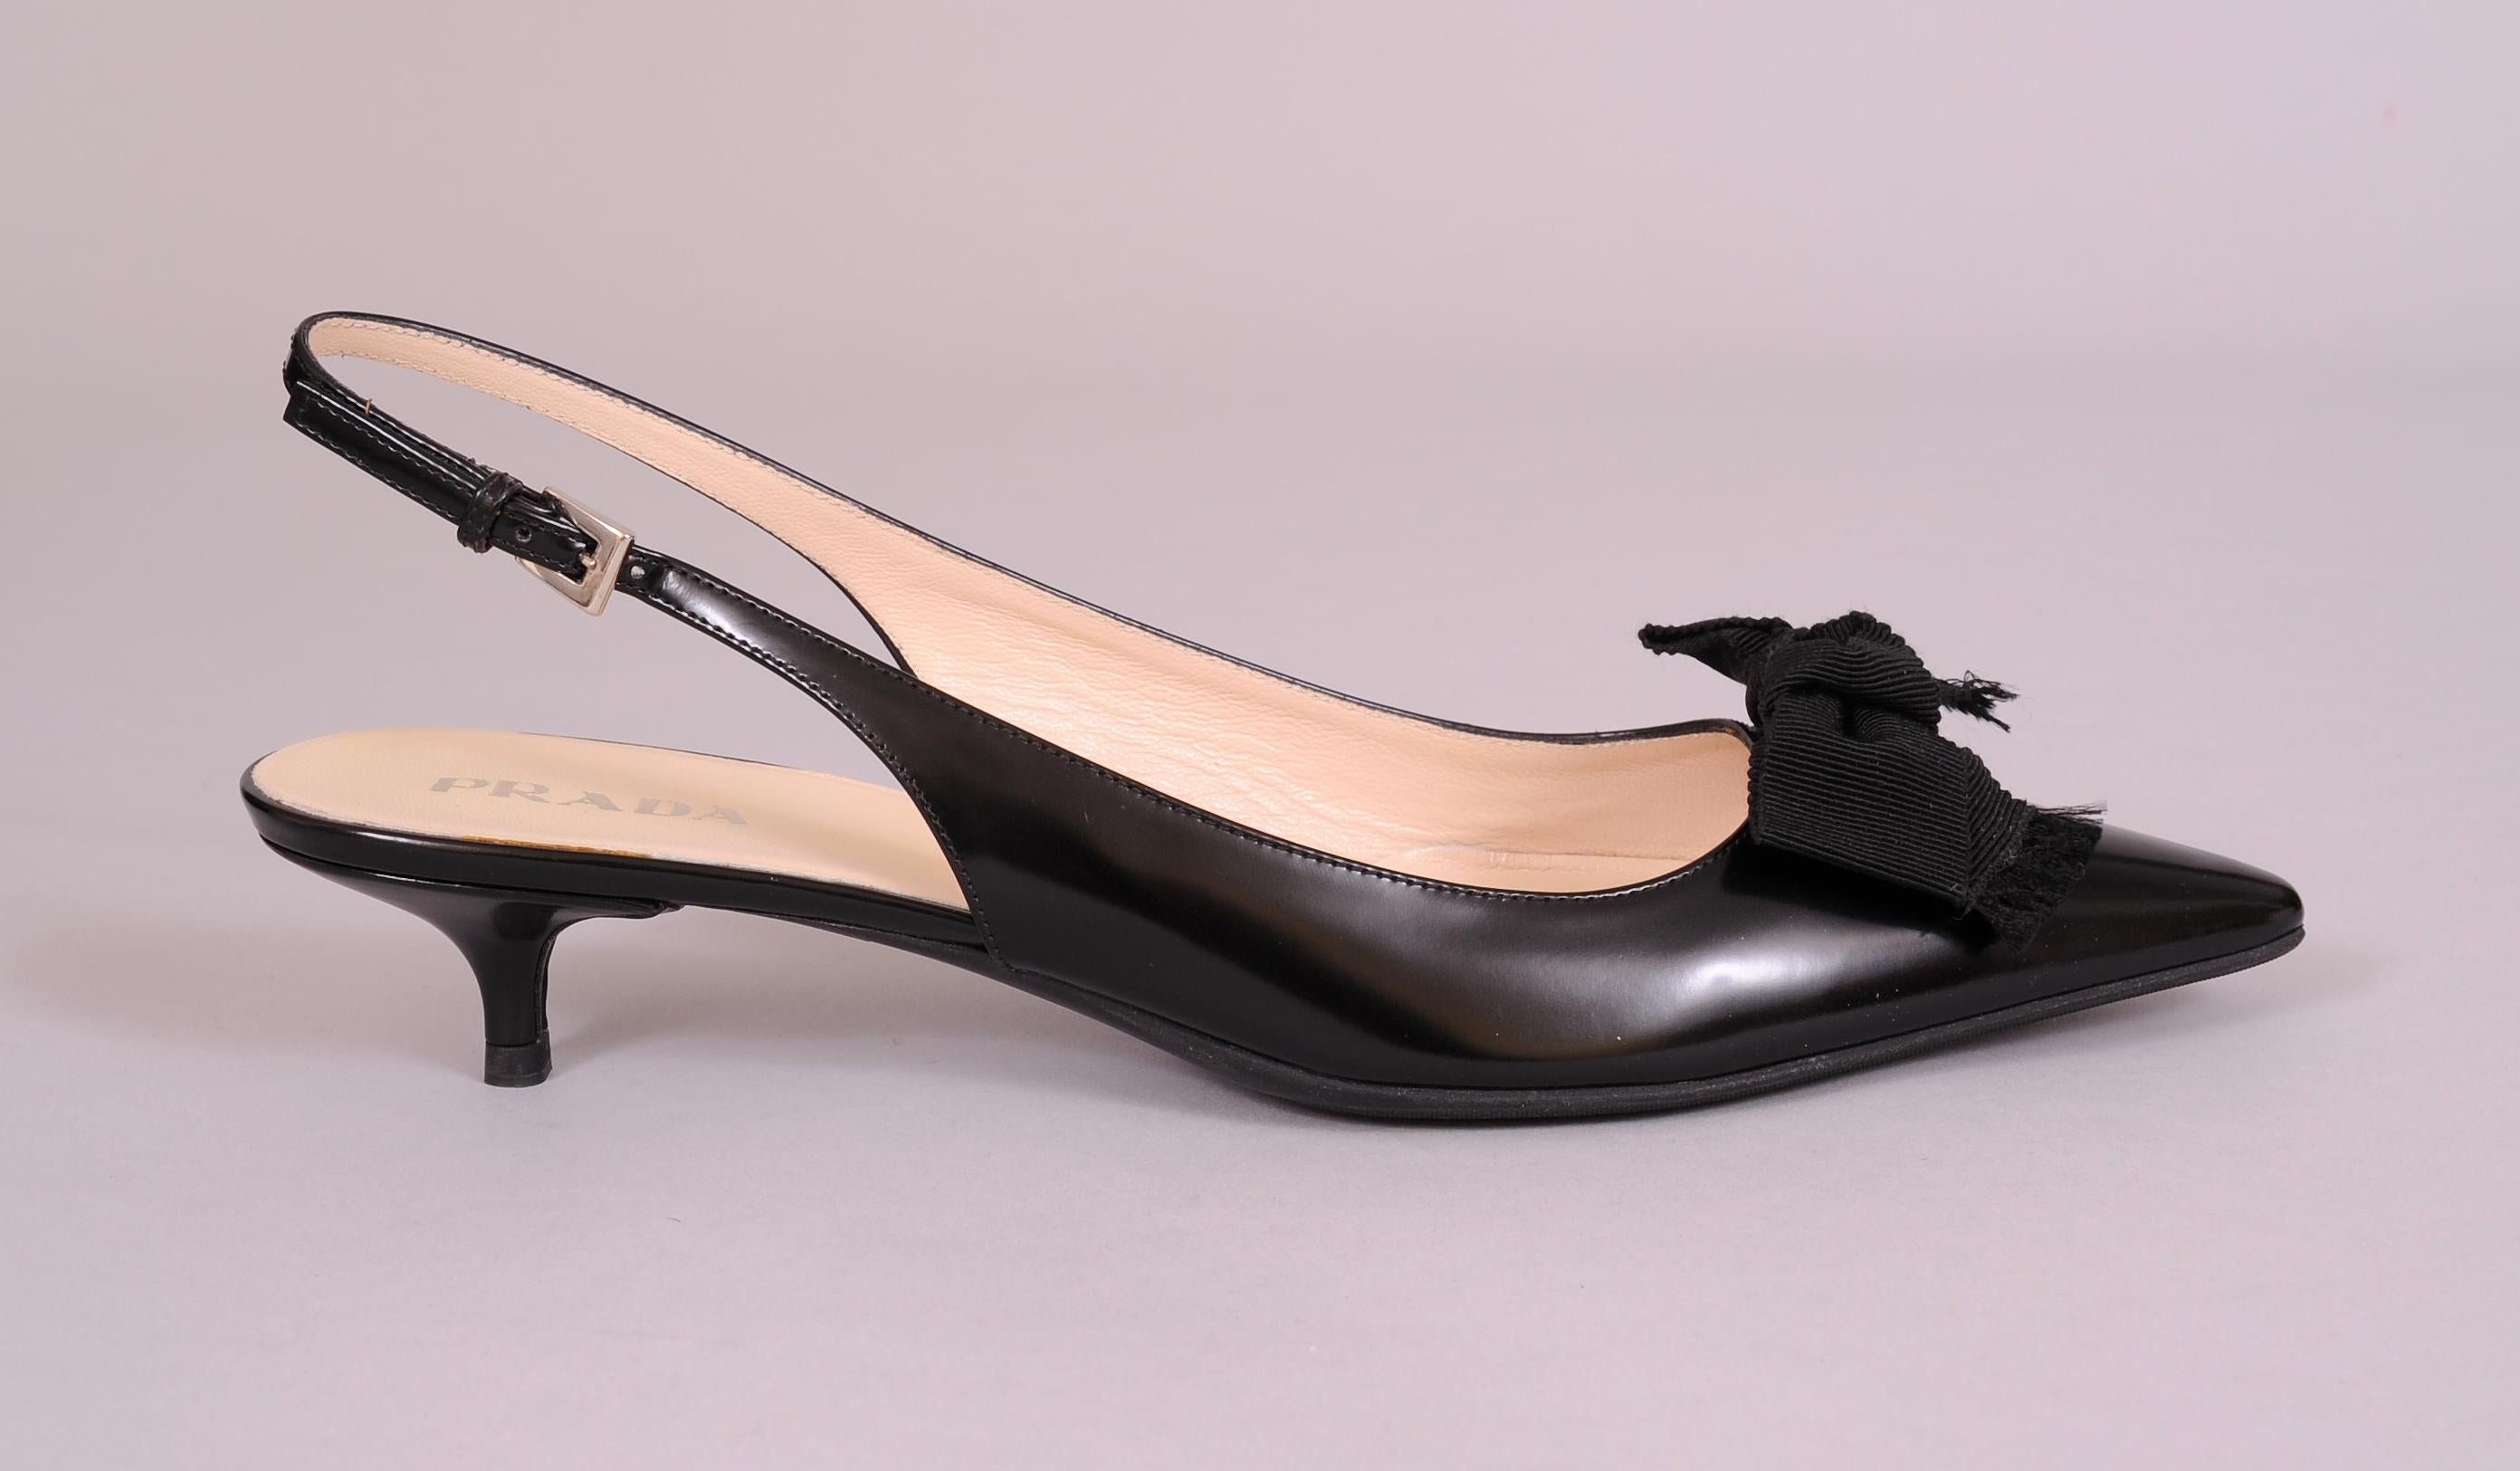 Black calfskin is accented with black faille bows on these sling back kitten heeled Prada shoes. They have never been worn, still in the original box they are in excellent condition. They are marked a size 40 1/2 and they have the original non slip